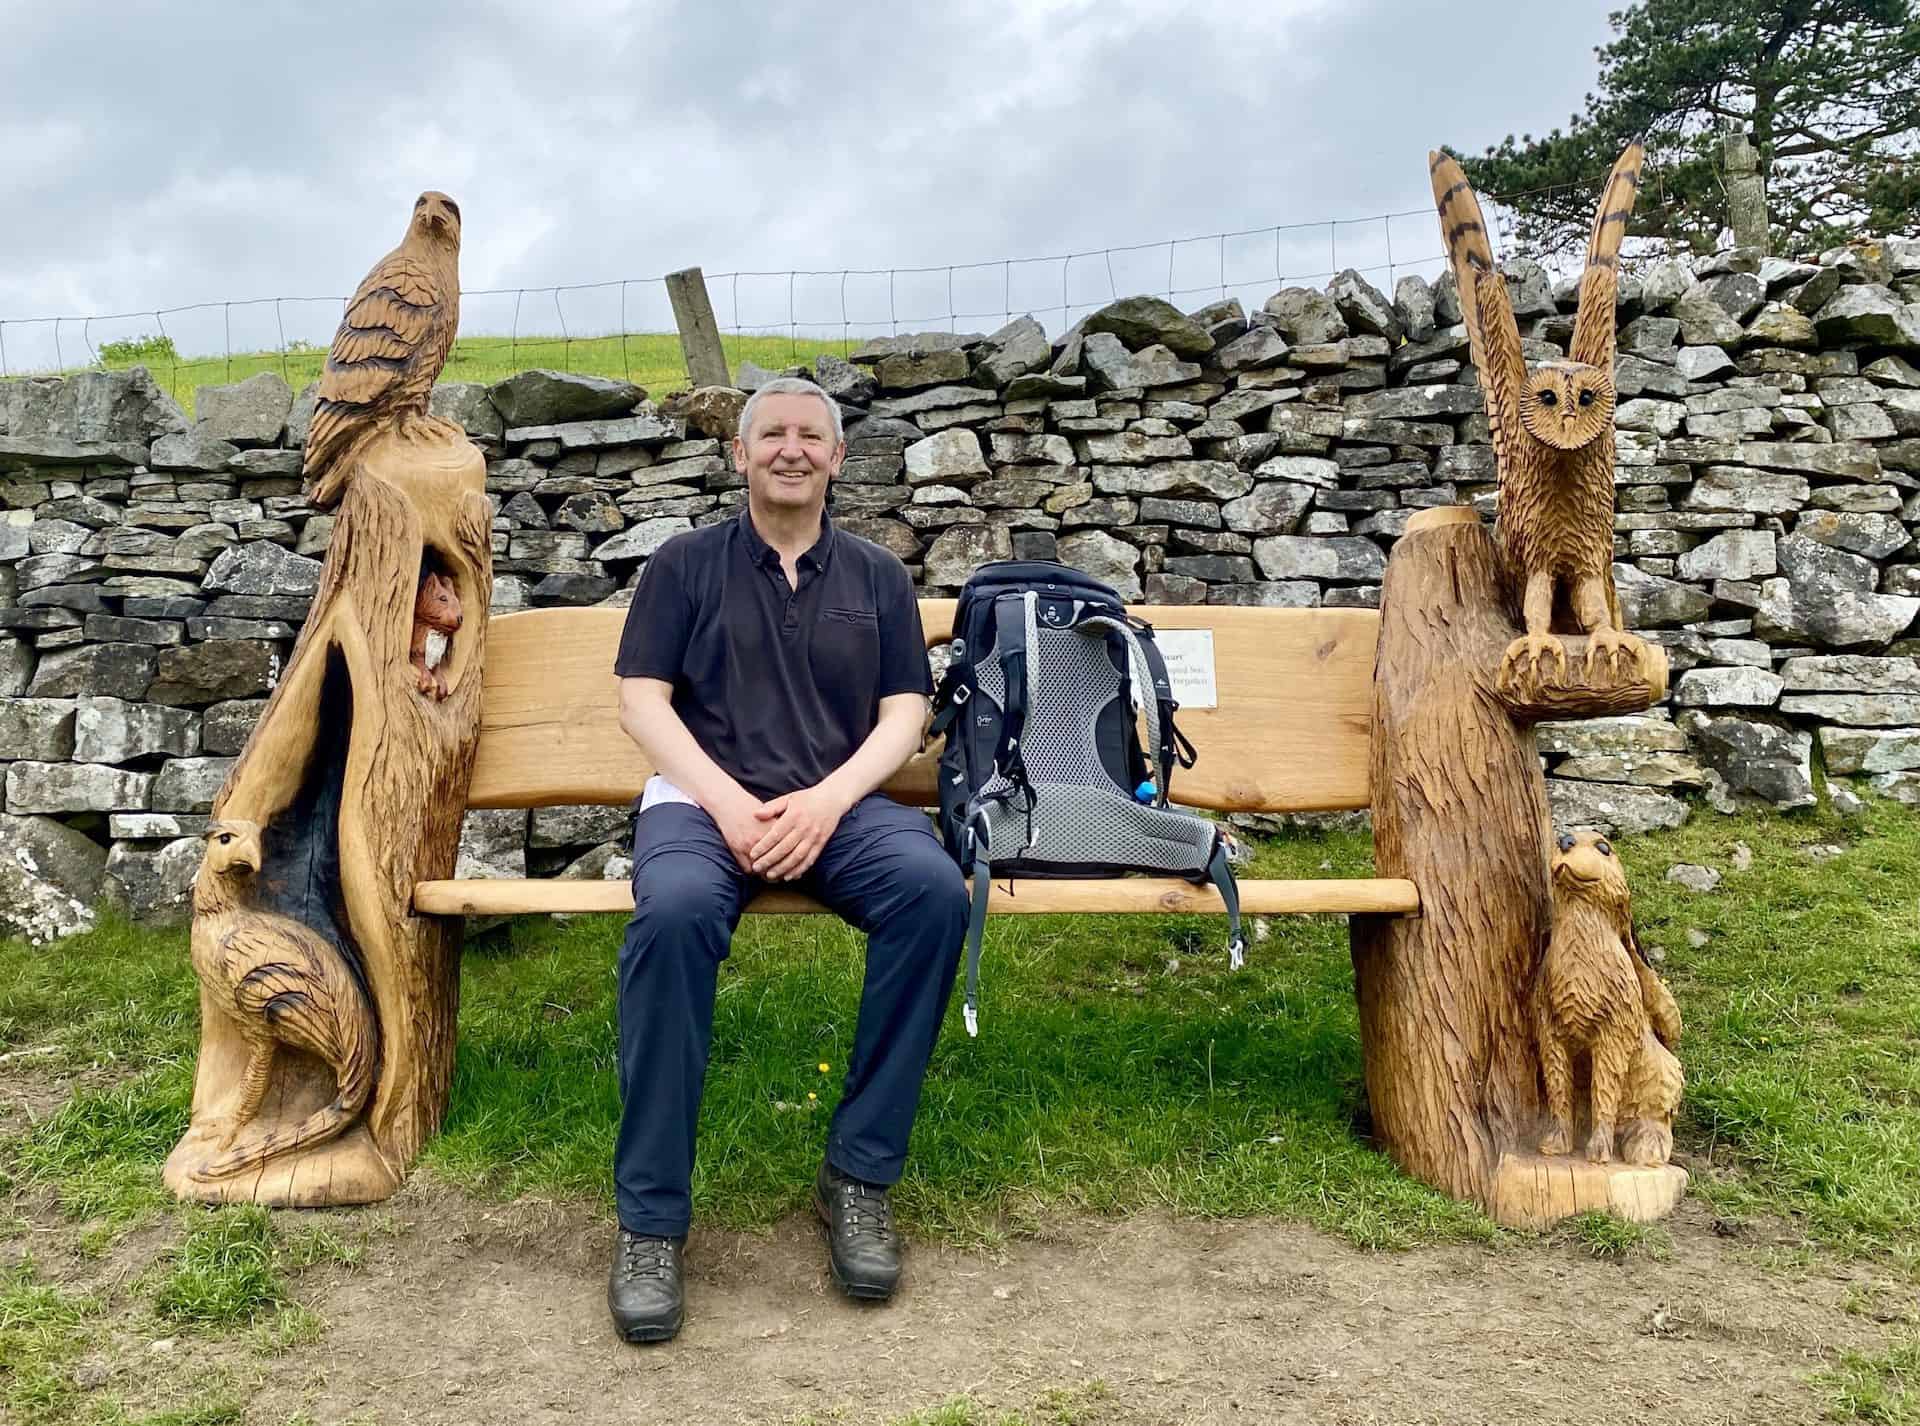 Time for a sit down at the end of a Wensleydale walk to Great Shunner Fell, Butter Tubs, and Fossdale. This comfortable and beautifully carved wooden memorial bench with great views of the village makes the ideal resting spot.